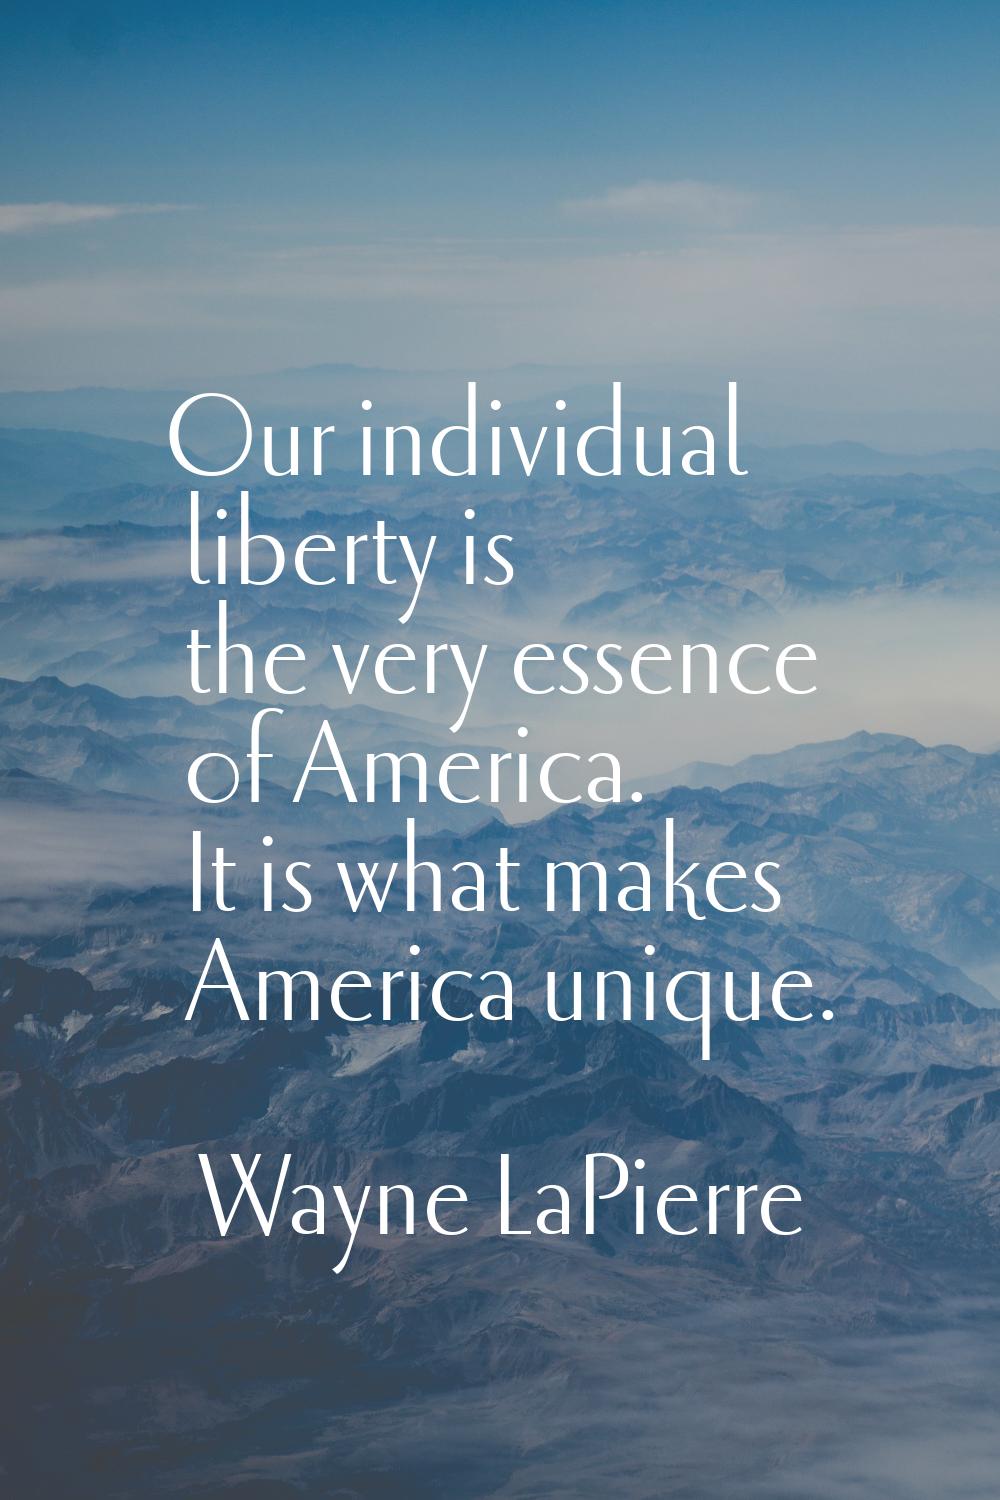 Our individual liberty is the very essence of America. It is what makes America unique.